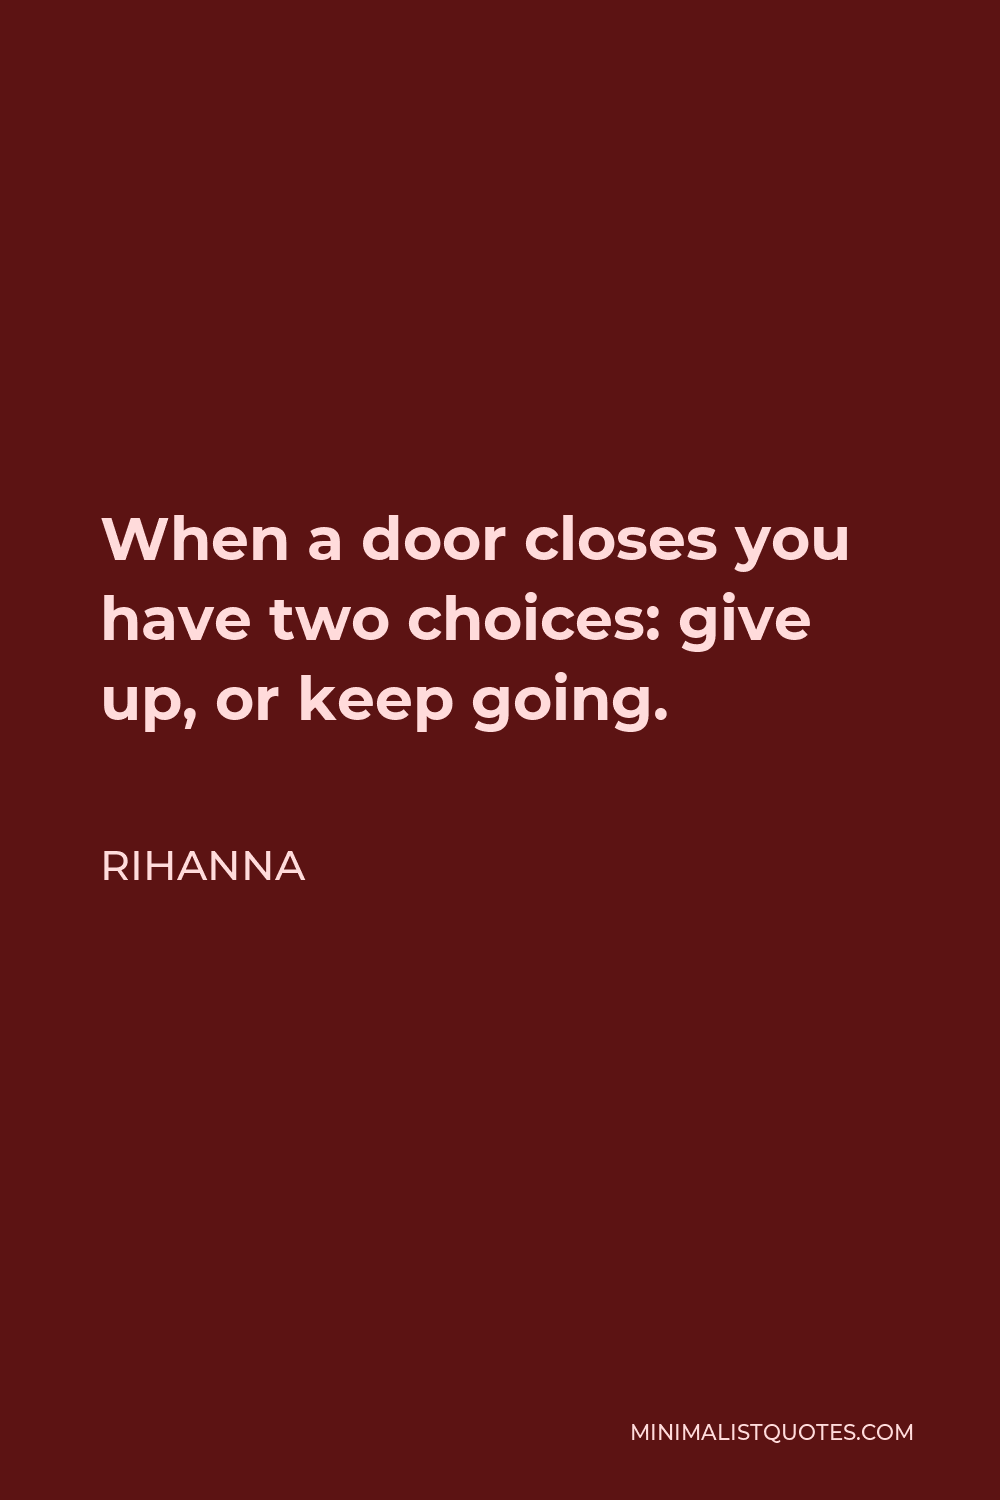 Rihanna Quote - When a door closes you have two choices: give up, or keep going.